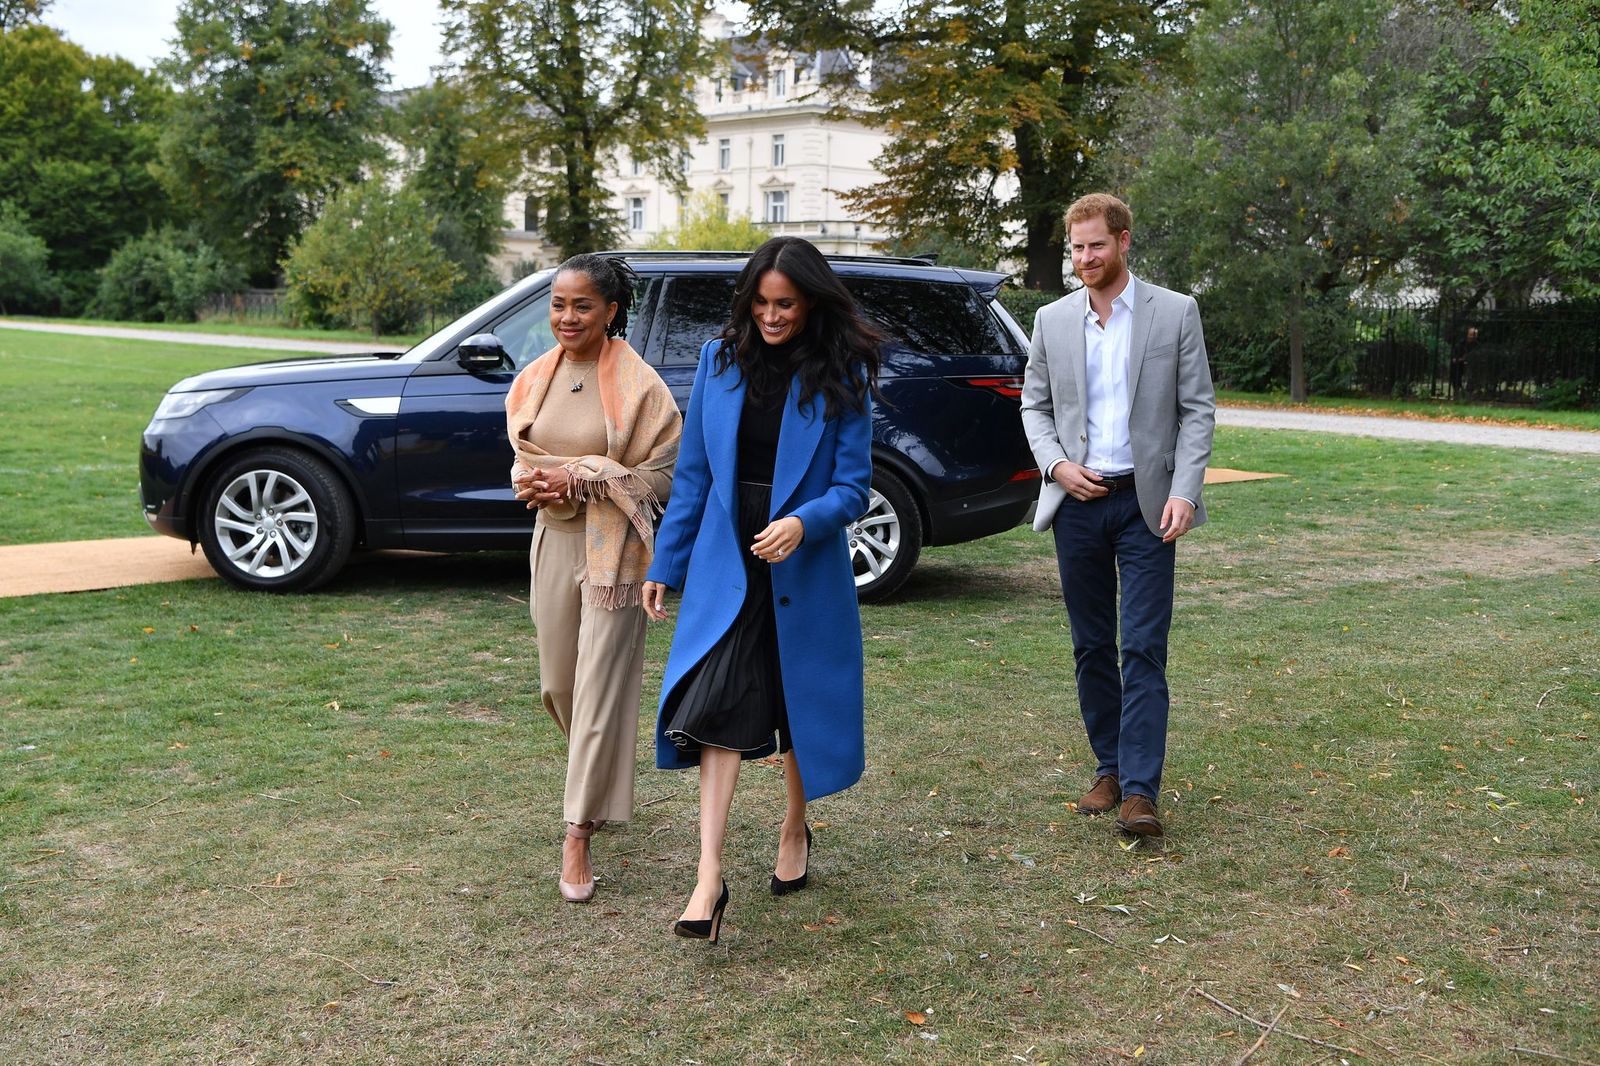 Meghan  arrives with her mother Doria Ragland and Prince Harry at Kensington Palace on September 20, 2018 | Photo: Getty Images